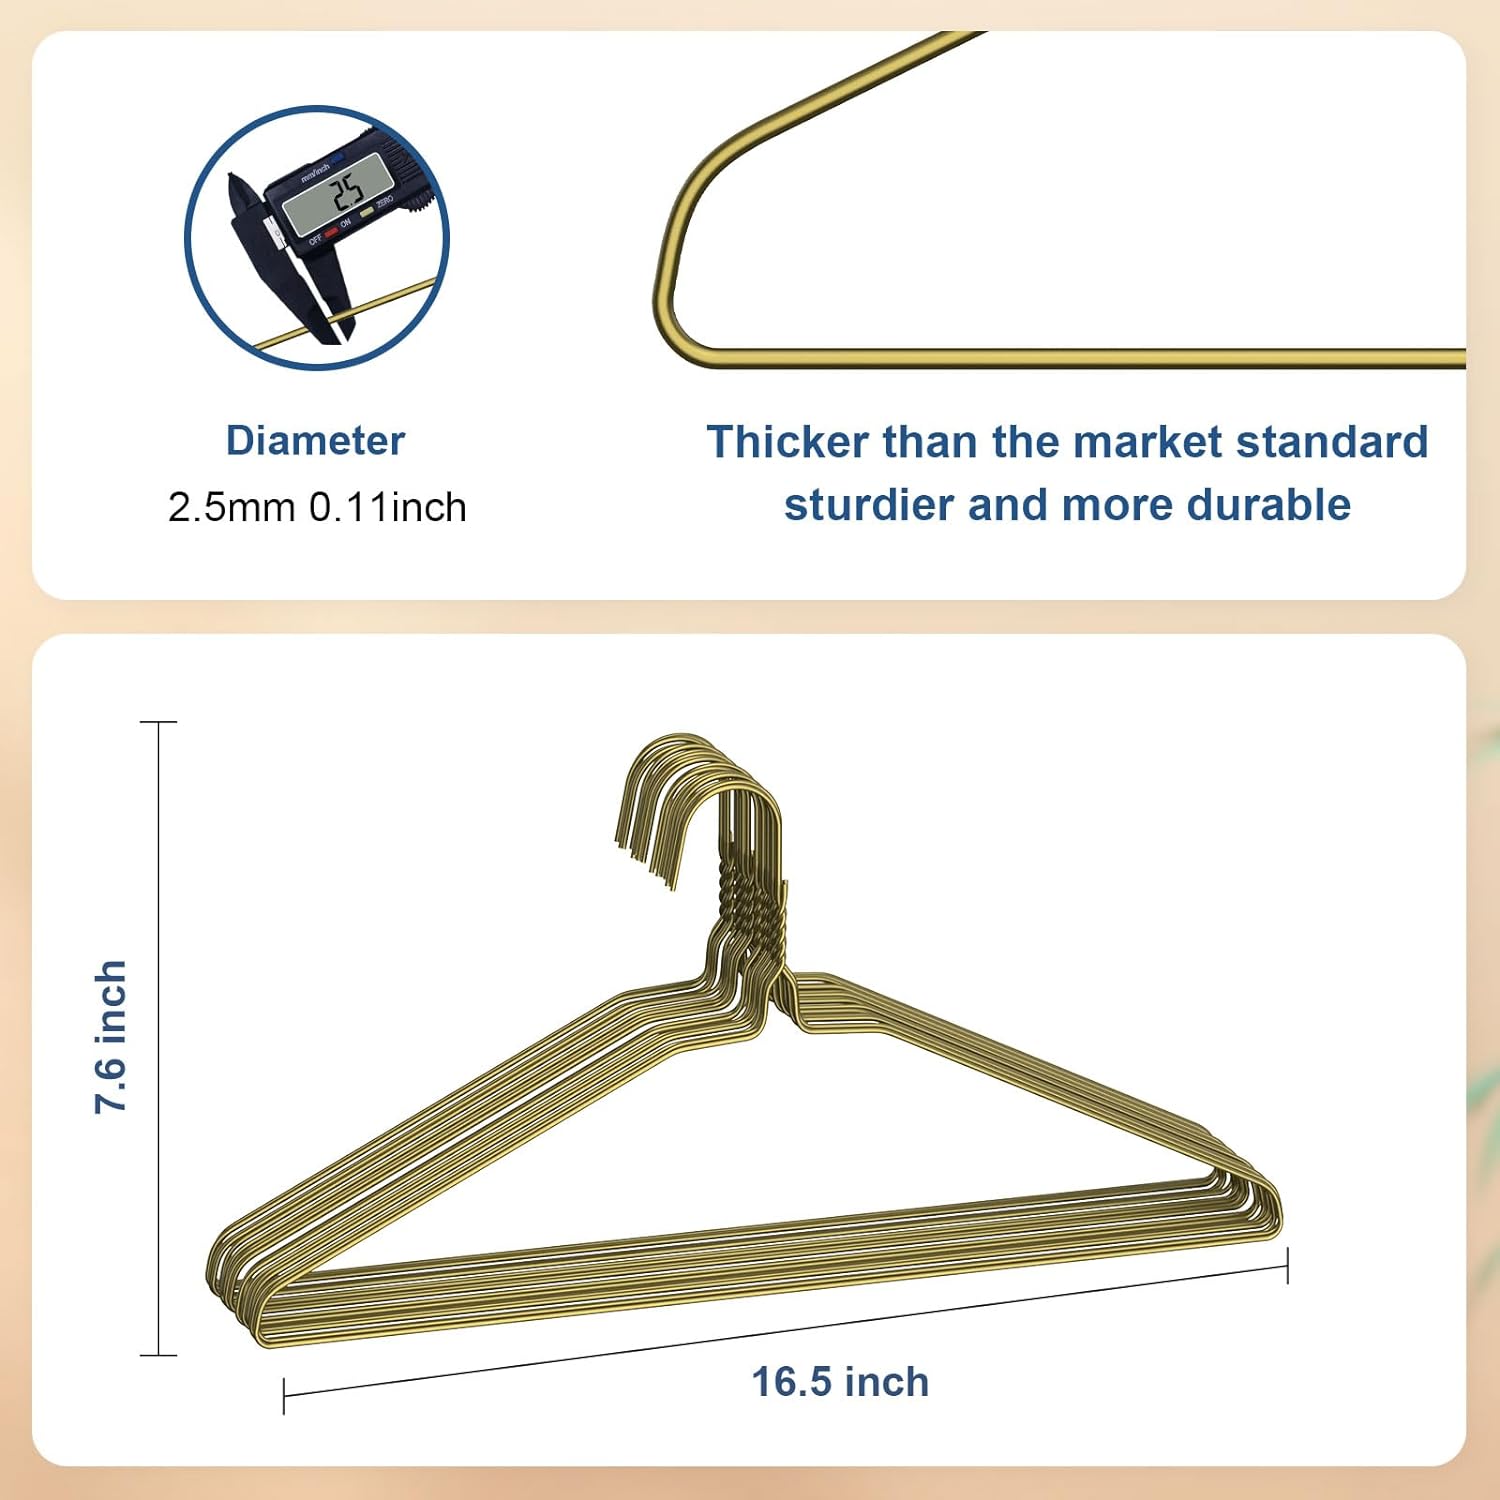 https://bigbigmart.com/wp-content/uploads/2023/12/SPECILITE-Wire-Hangers-100-Pack-Metal-Wire-Clothes-Hanger-Bulk-for-Coats-Space-Saving-Metal-Hangers-Non-Slip-16-Inch-12-Gauge-Ultra-Thin-for-Standard-Size-Suits-Shirts-Pants-Skirts-Bronze1.jpg